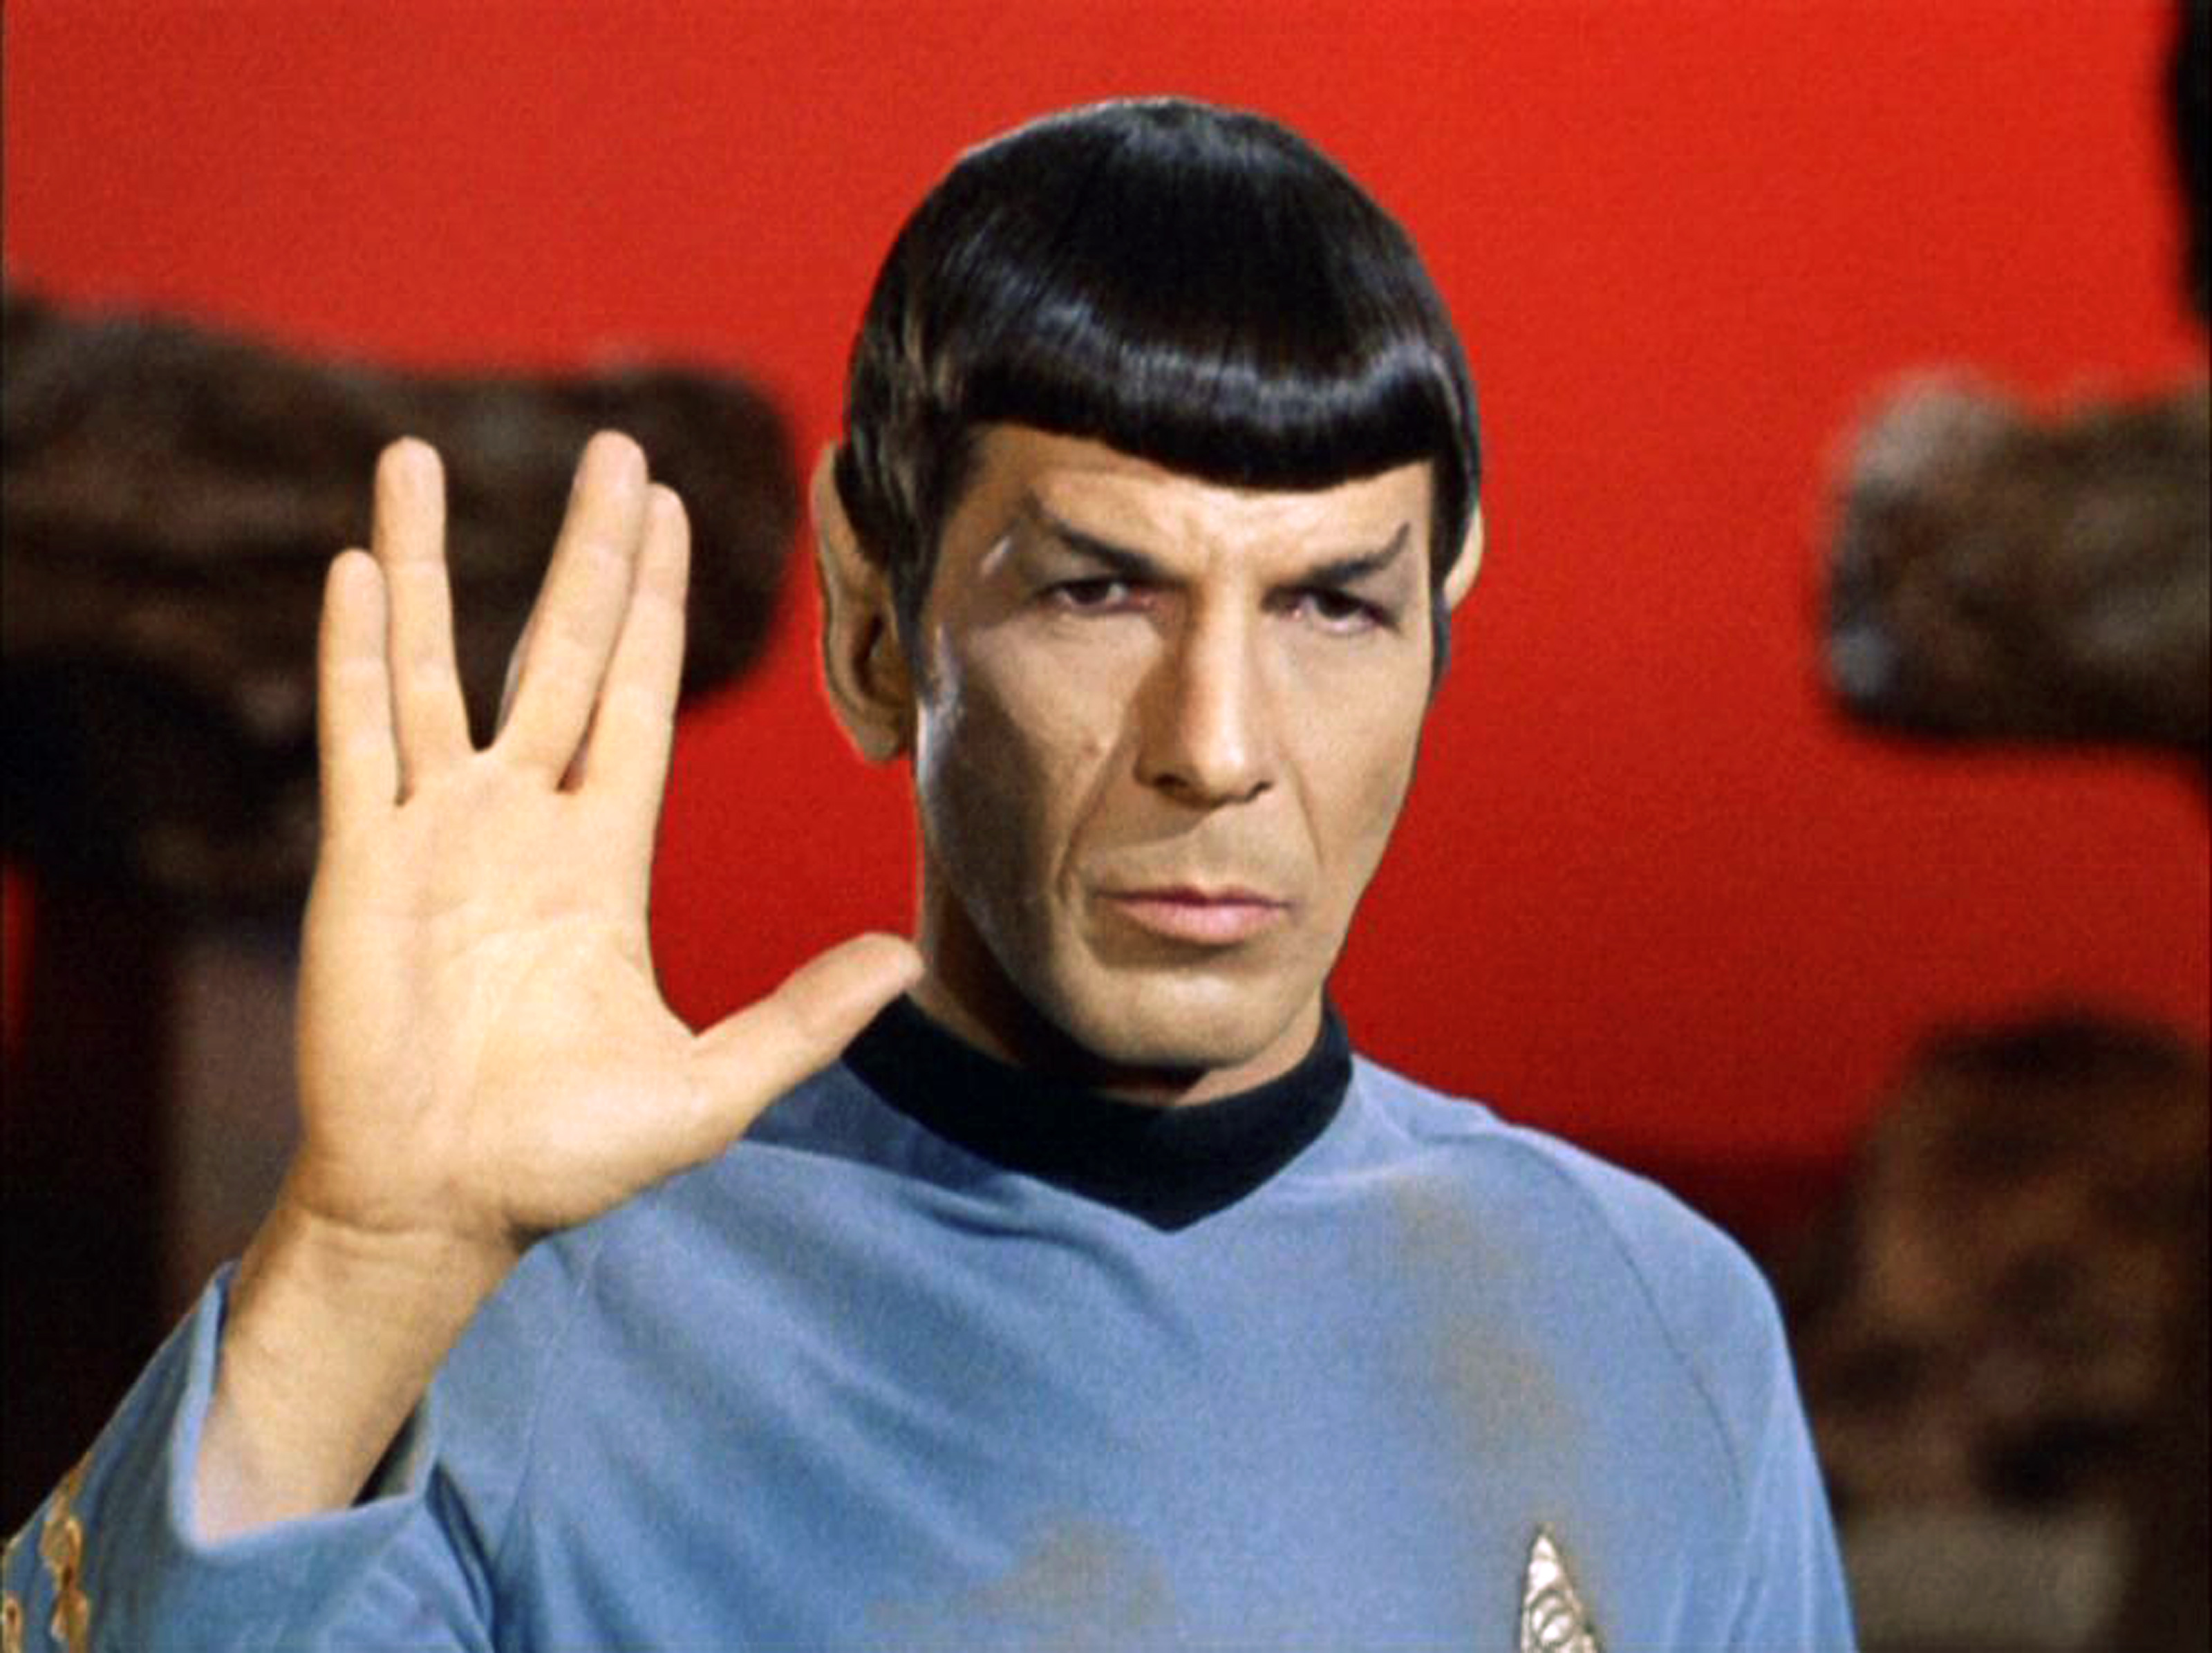 Leonard Nimoy as Mr. Spock  in "Star Trek: The Original Series" episode 'Amok Time'. Spock shows the Vulcan salute, usually accompanied with the words, "Live long and prosper." (CBS Photo Archive&mdash;CBS via Getty Images)